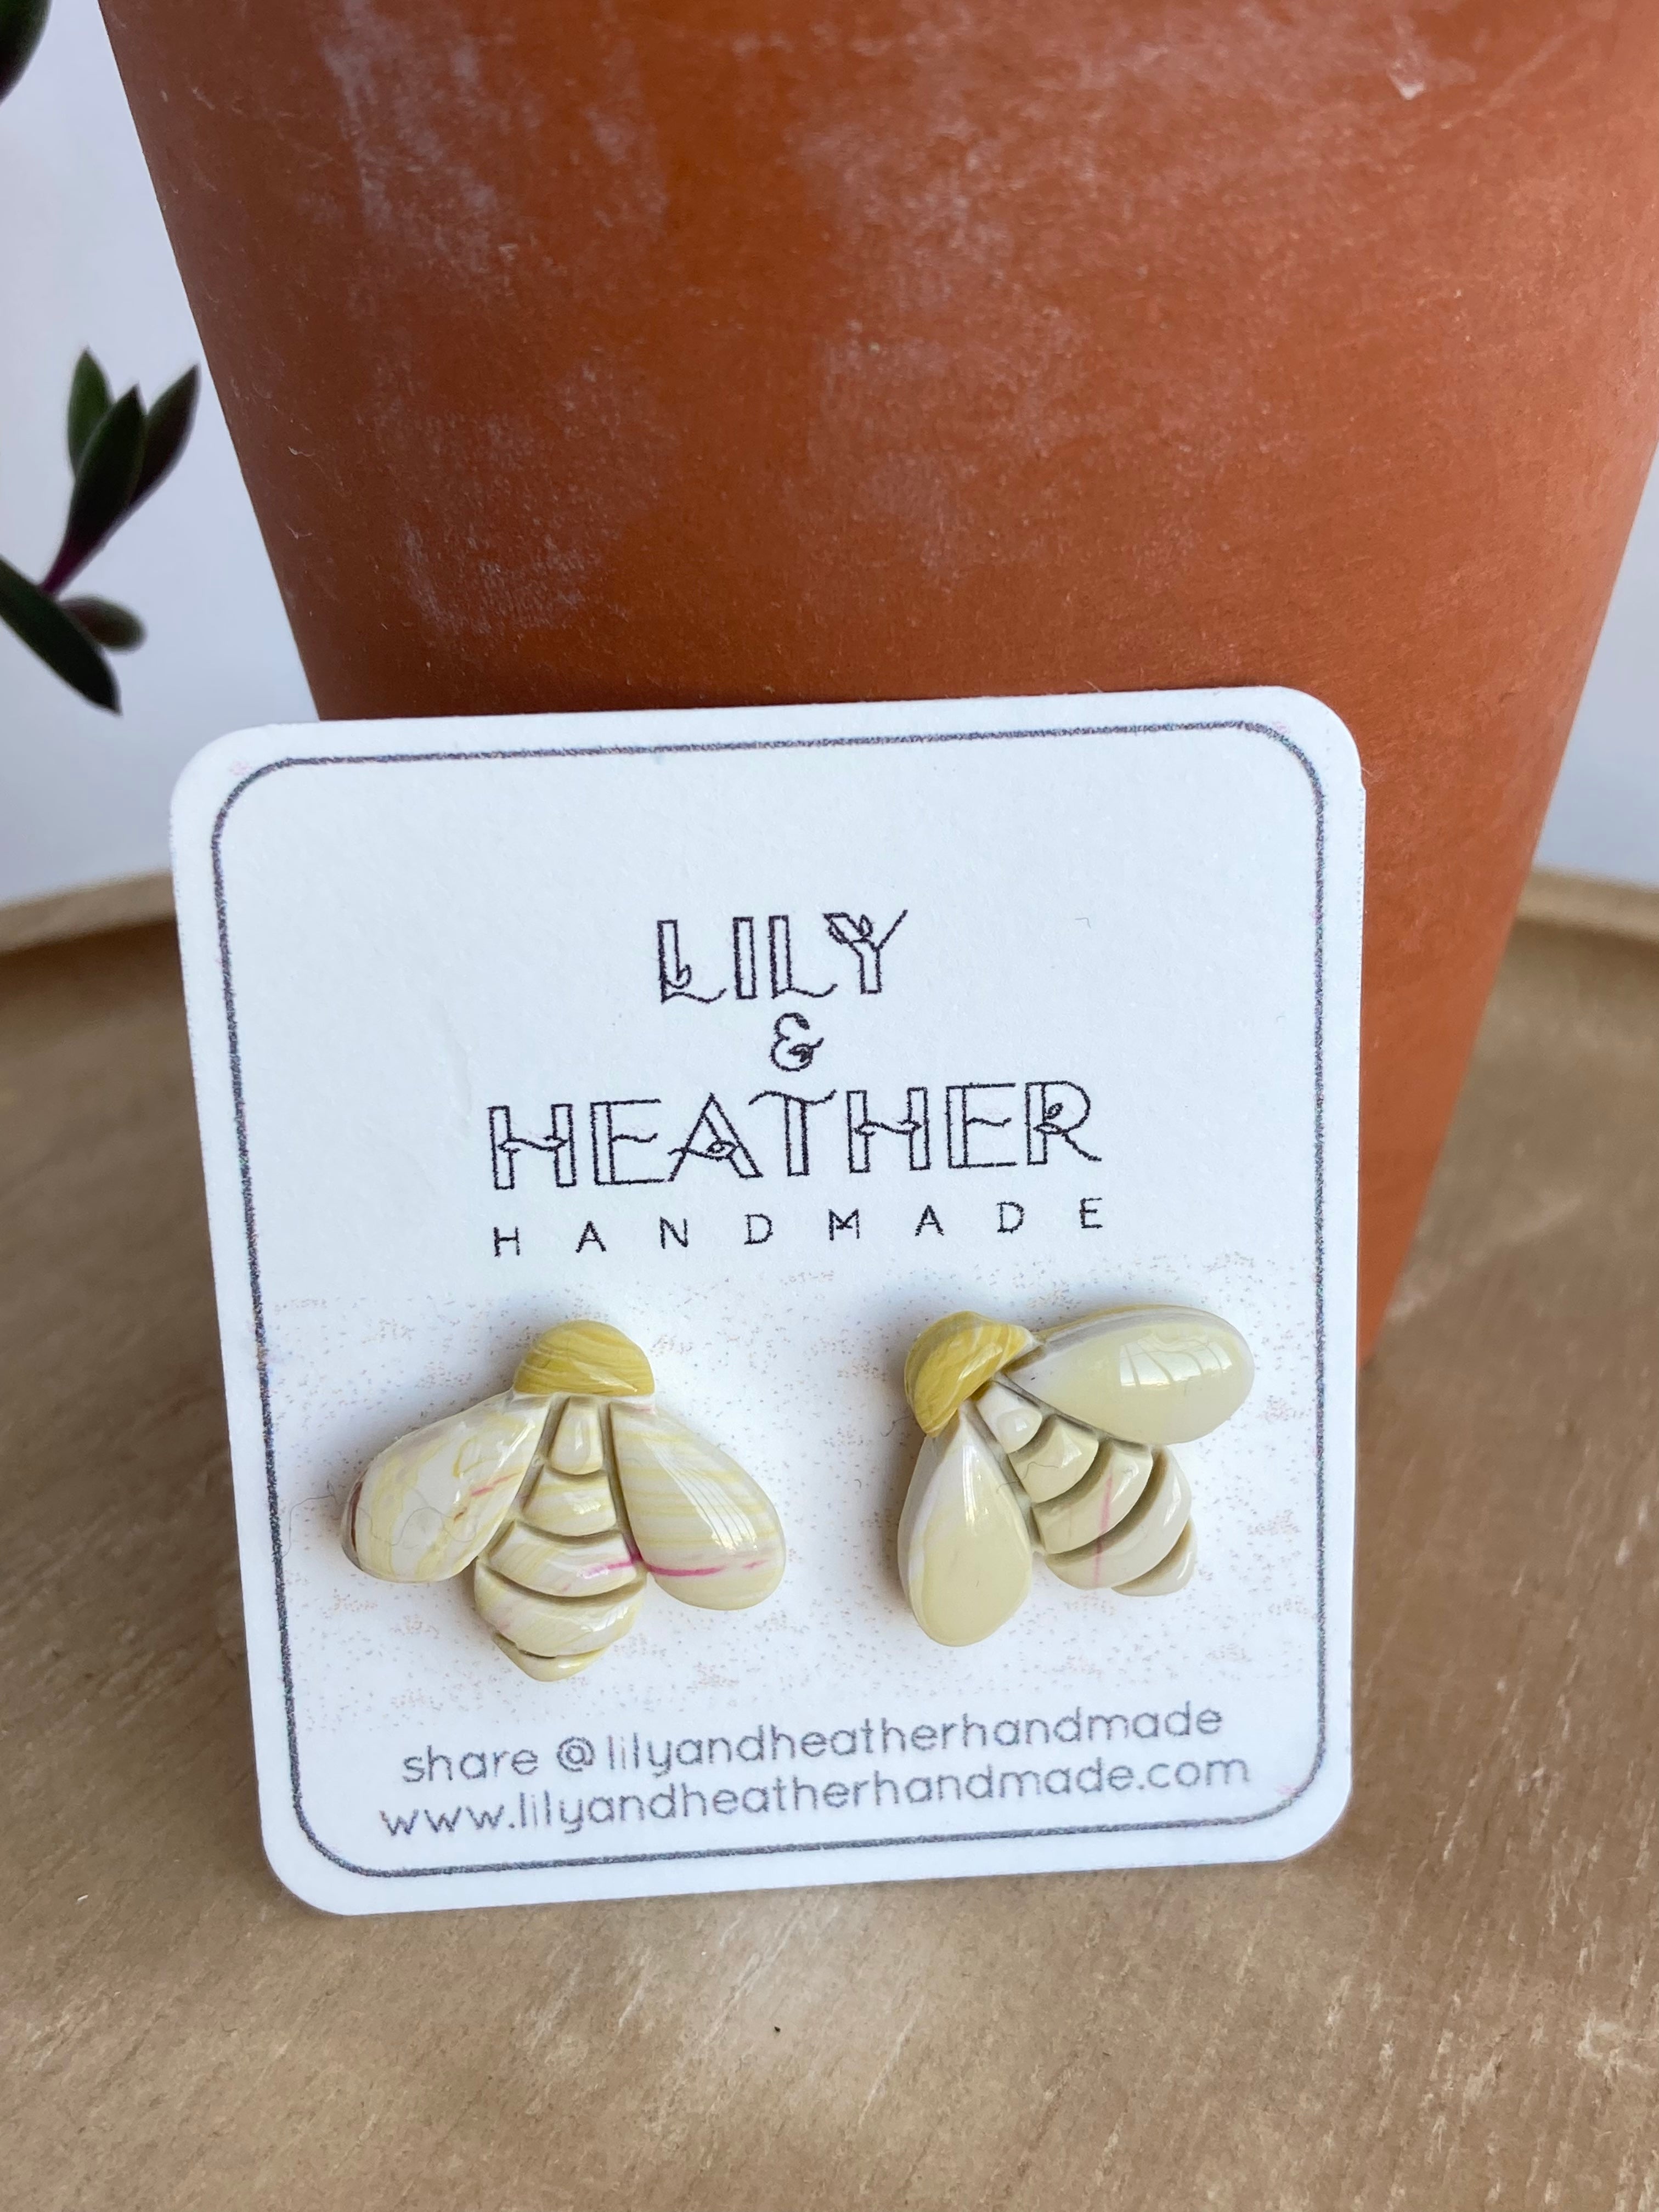 Earrings from Lily & Heather Handmade